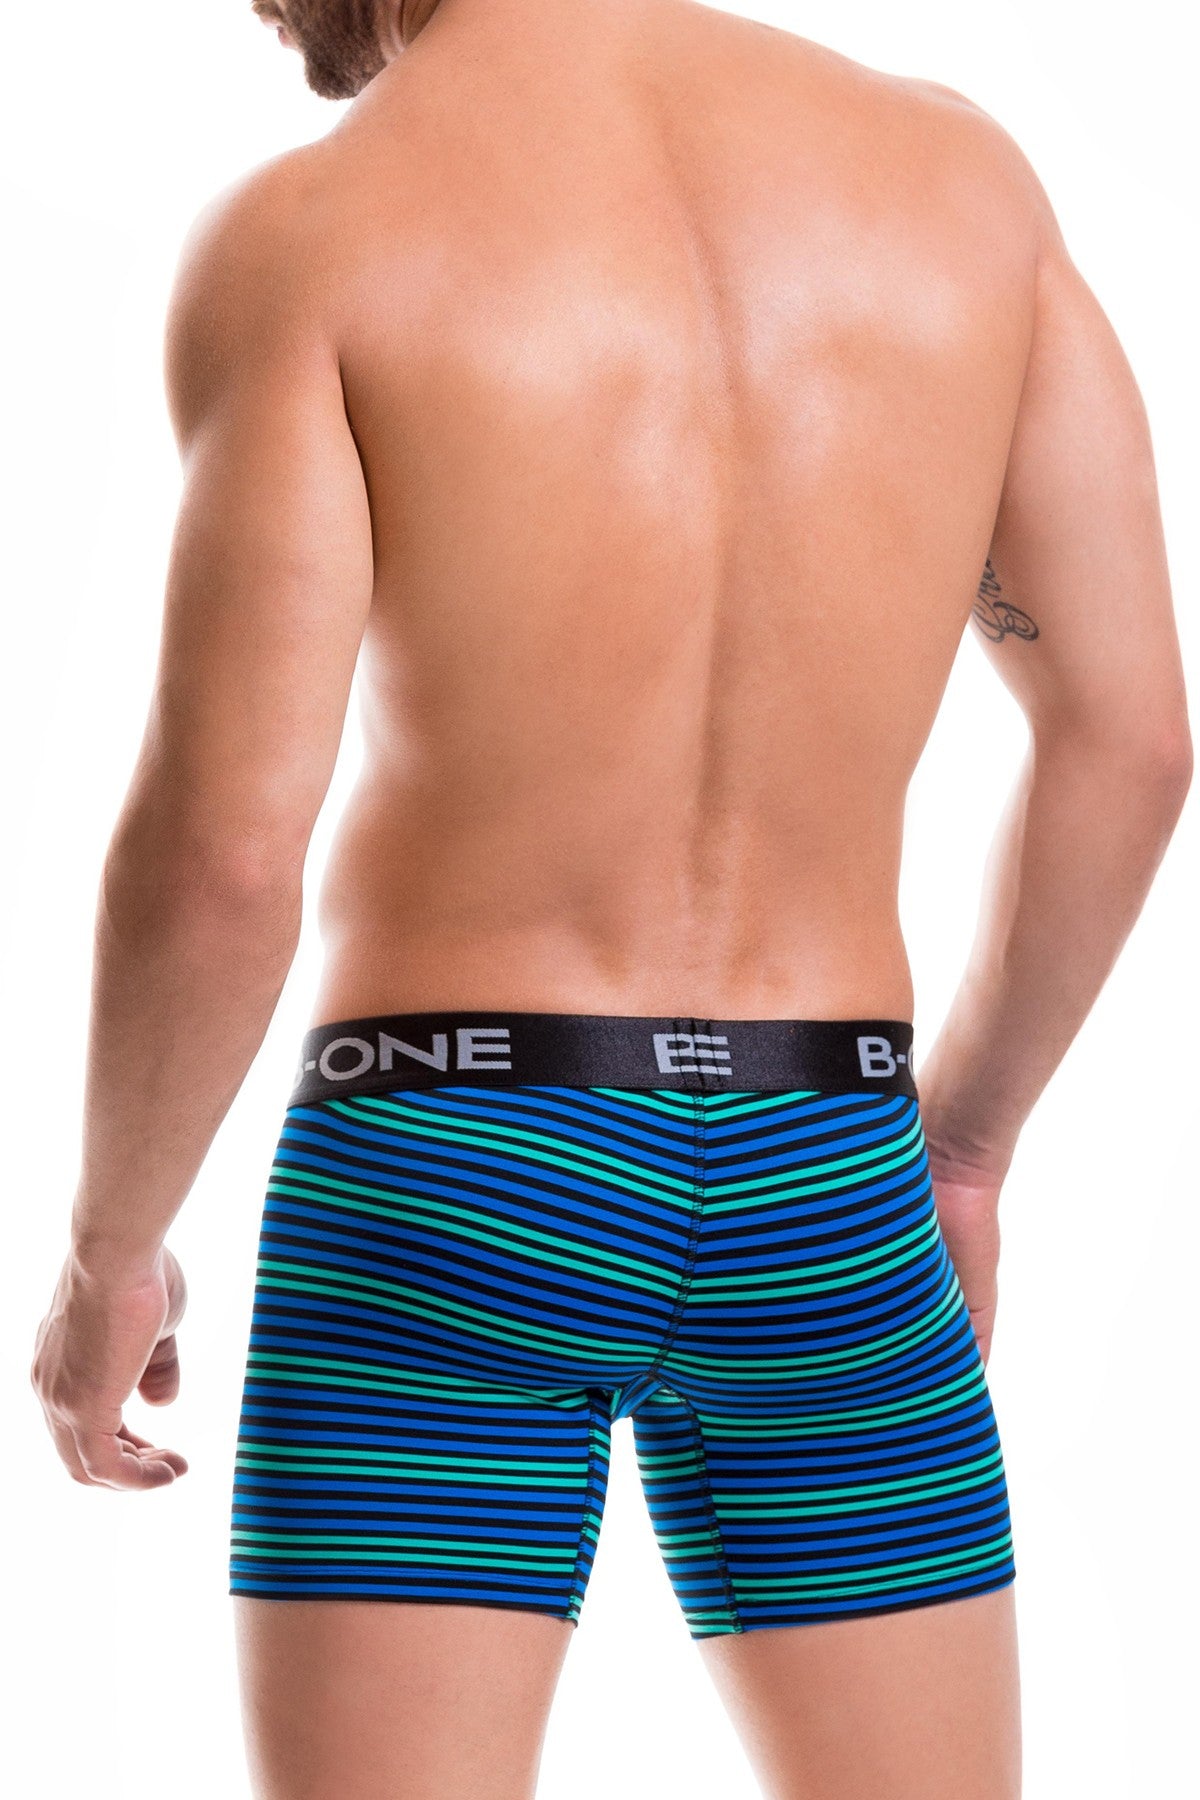 B-One by JOR Blue Lincoln Boxer Brief